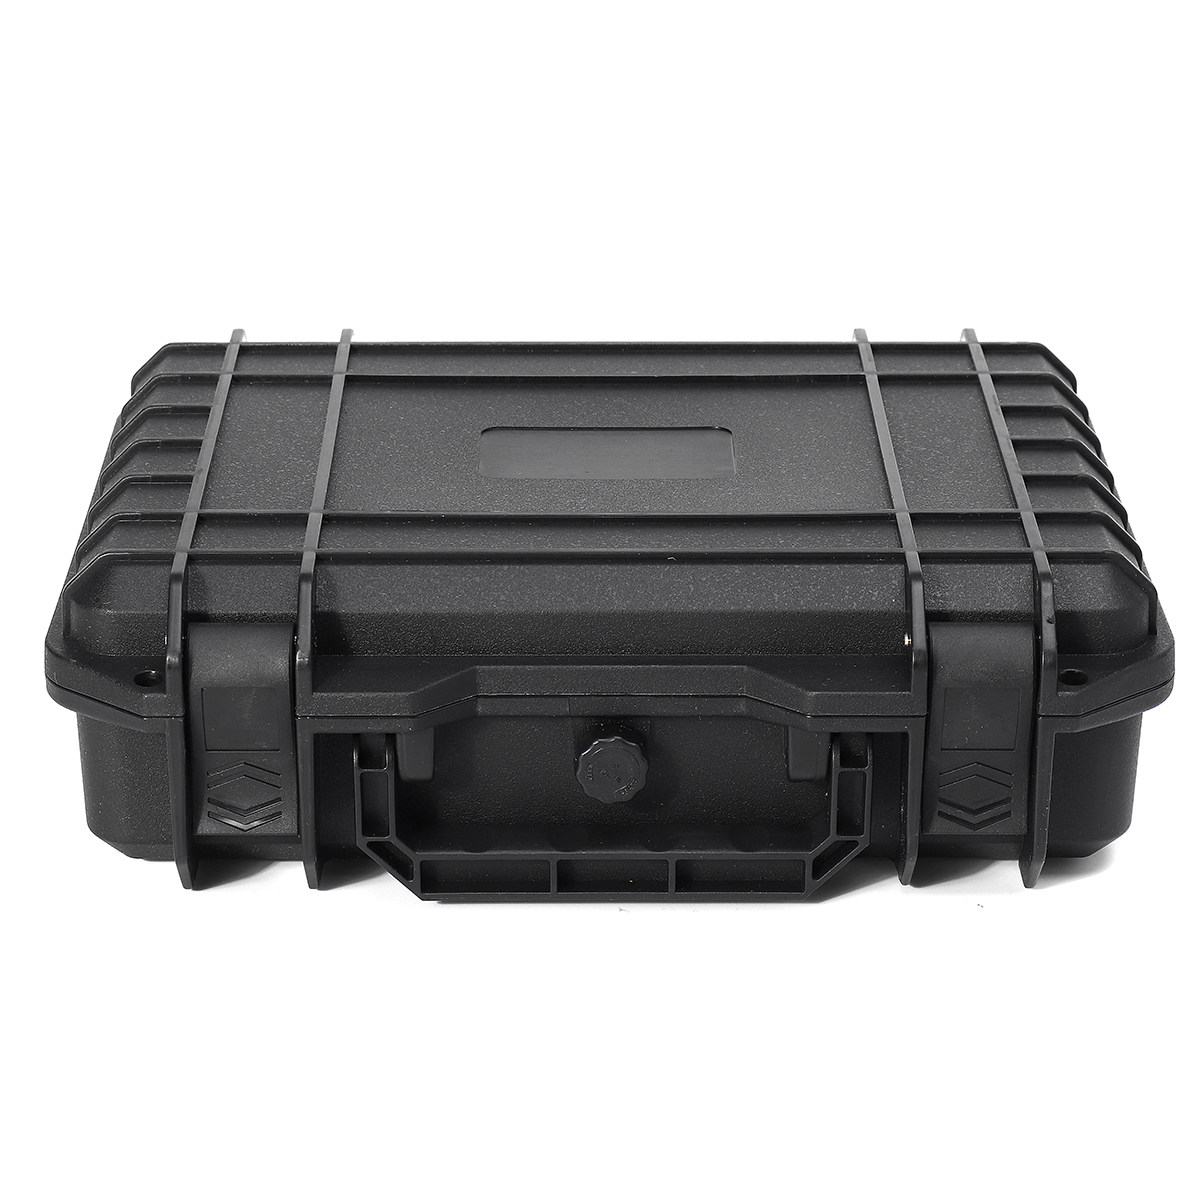 Waterproof-Hard-Carrying-Case-Bag-Tool-Storage-Box-Camera-Photography-with-Sponge-1664833-5